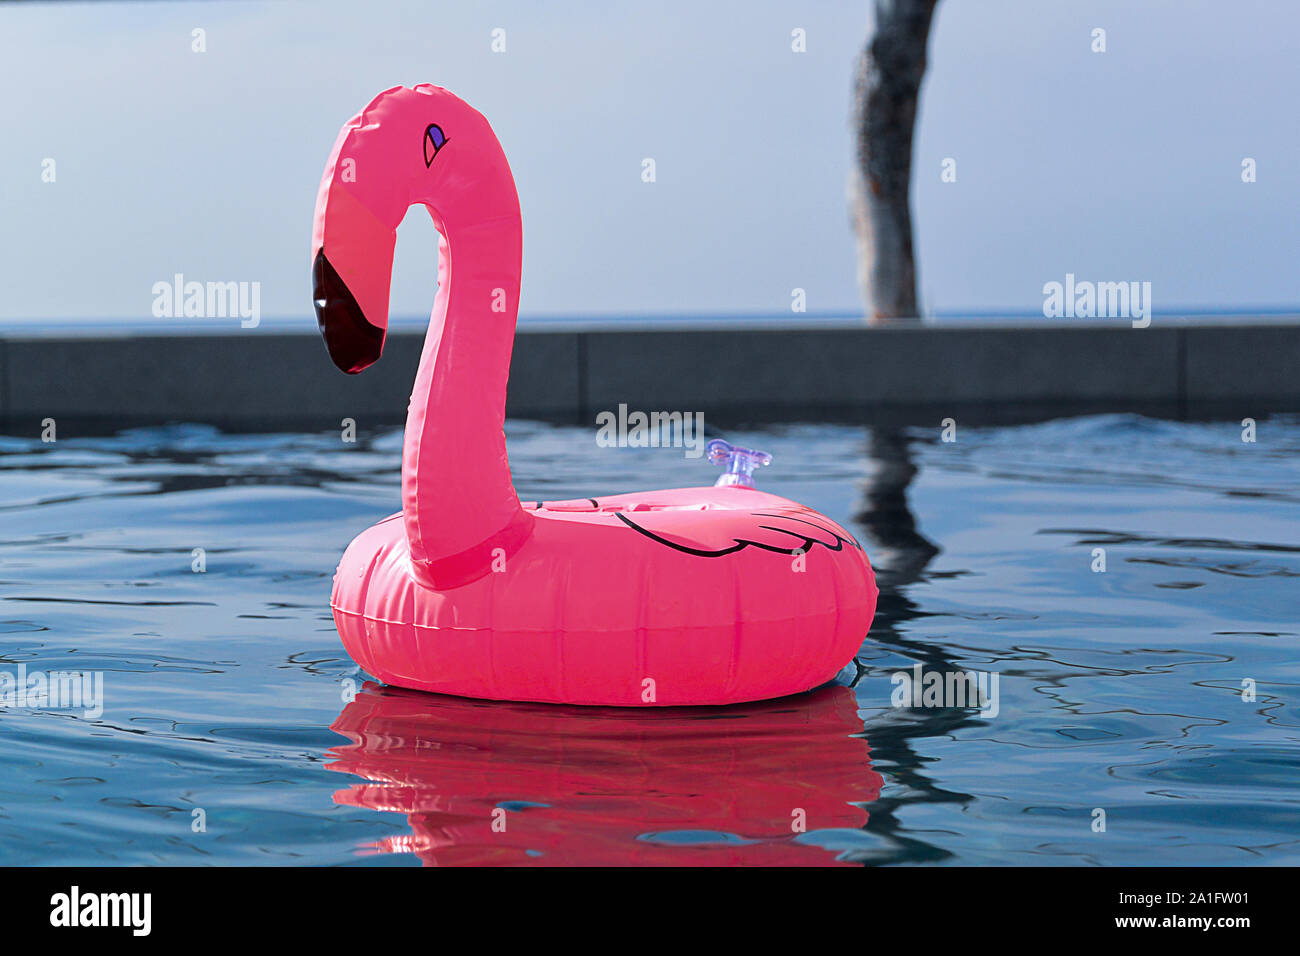 Pink inflatable flamingo drinks holder in a swimming pool Stock Photo